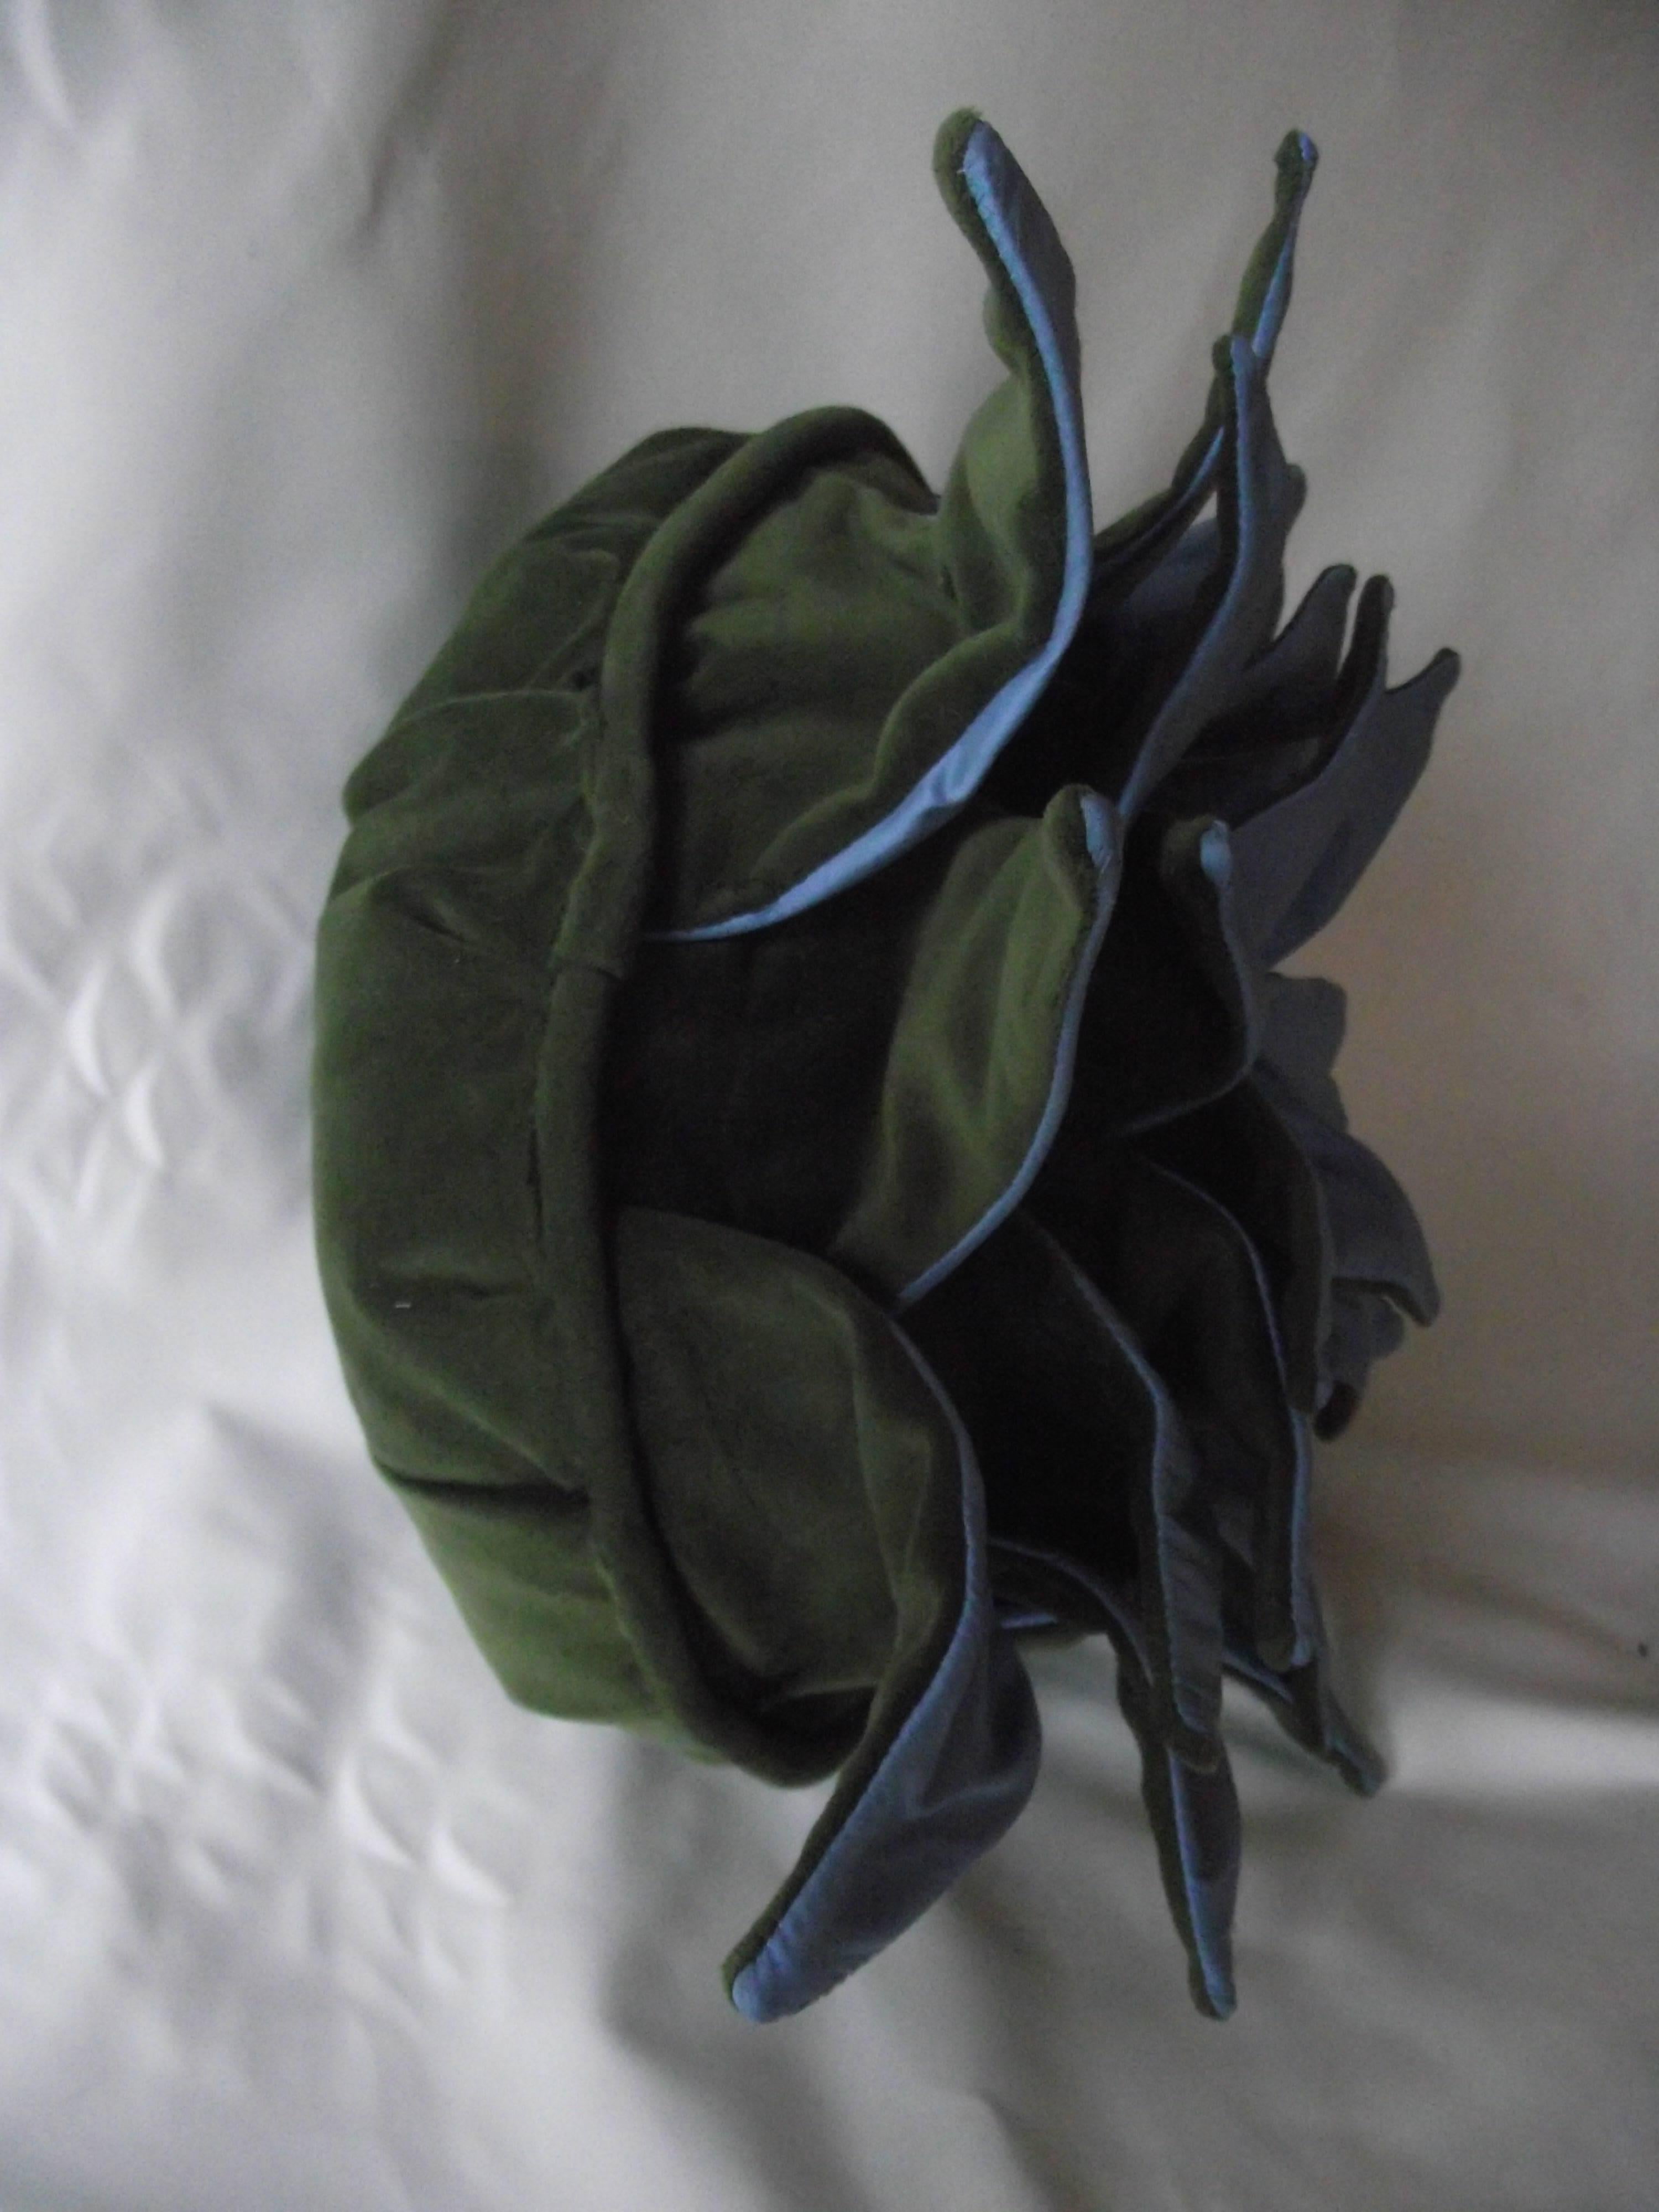 This arresting blue silk and green velvet pillow design is inspired by the Dahlia flower. A Gantt Design Studio original design, each pillow is made by hand, signed numbered and dated; It is a limited edition. Only five pillows in each color will be